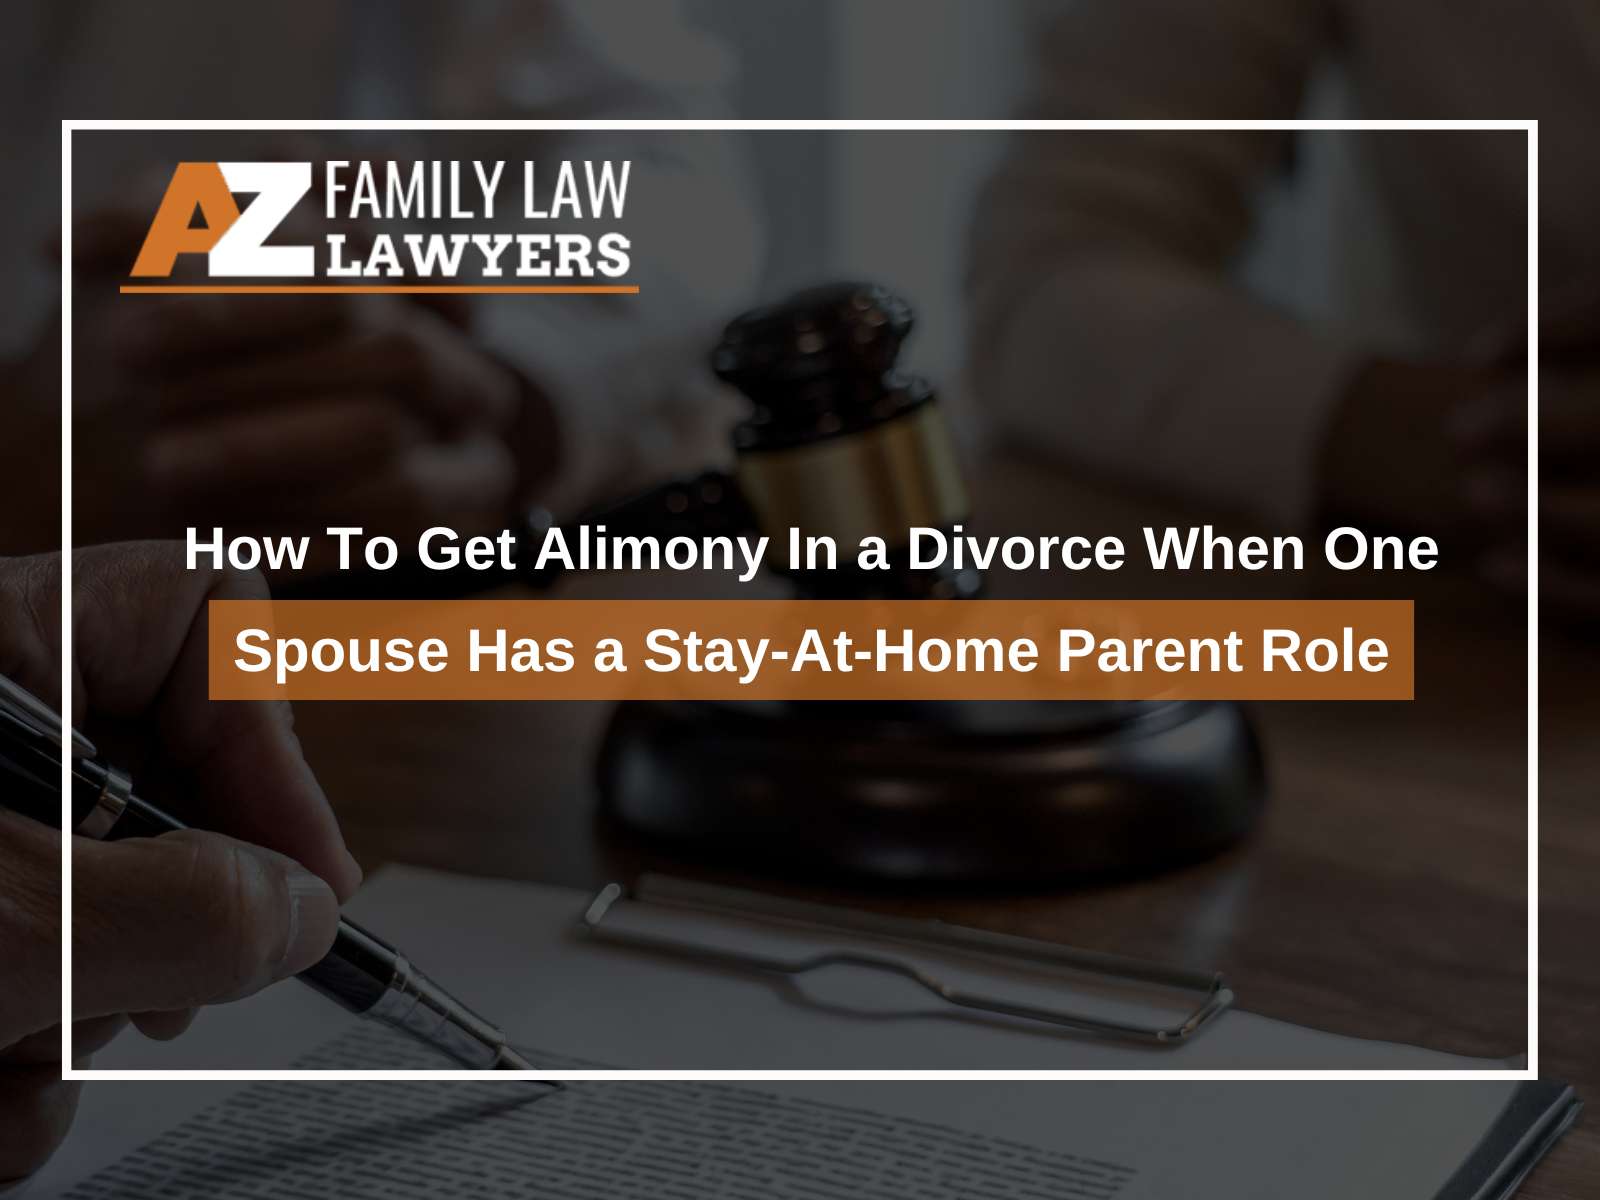 How To Get Alimony In a Divorce When One Spouse Has a Stay-At-Home Parent Role